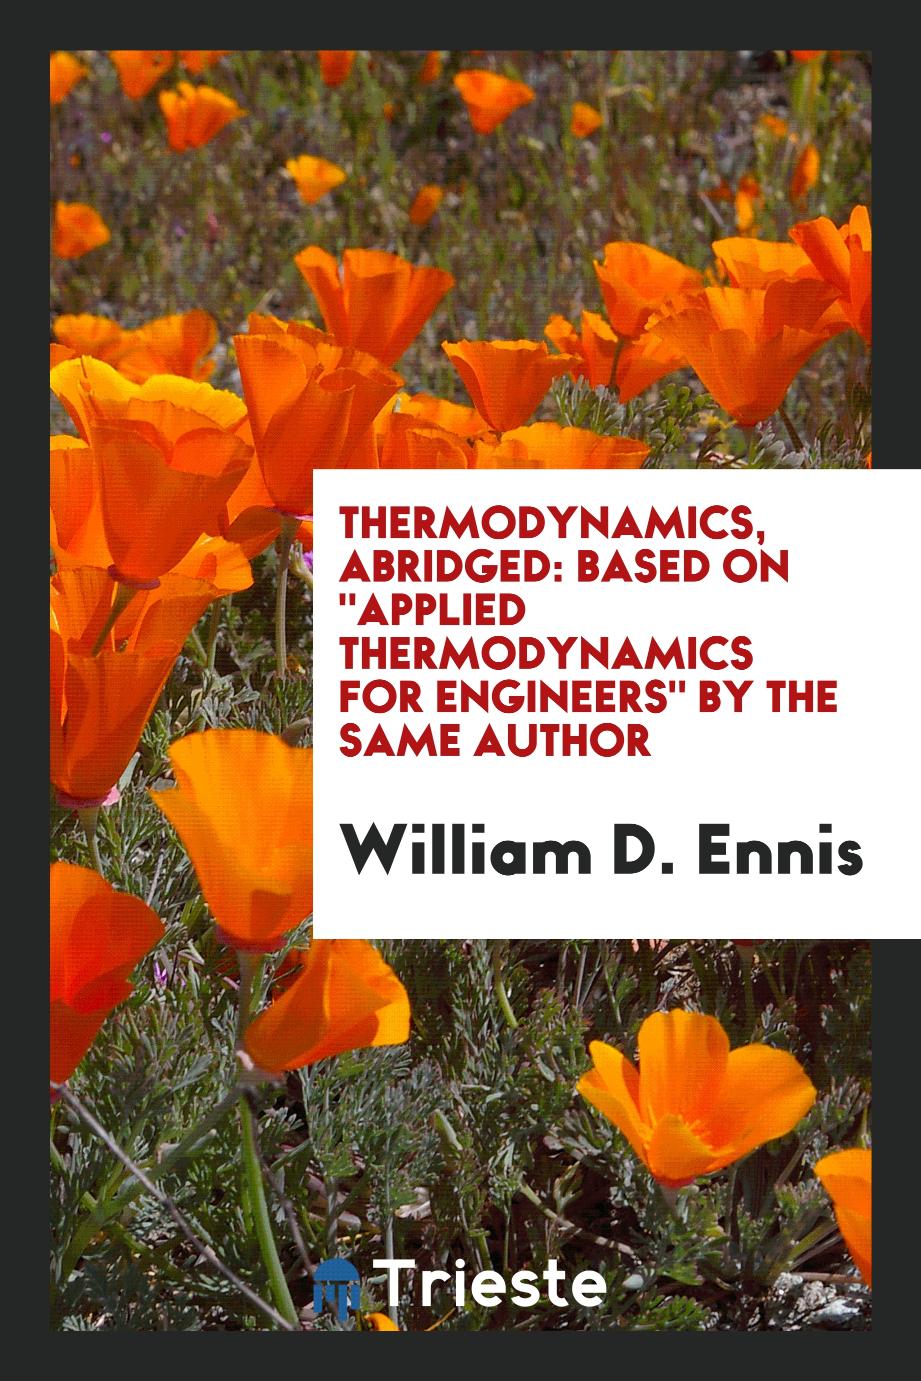 Thermodynamics, Abridged: Based On "Applied Thermodynamics for Engineers" by the Same Author